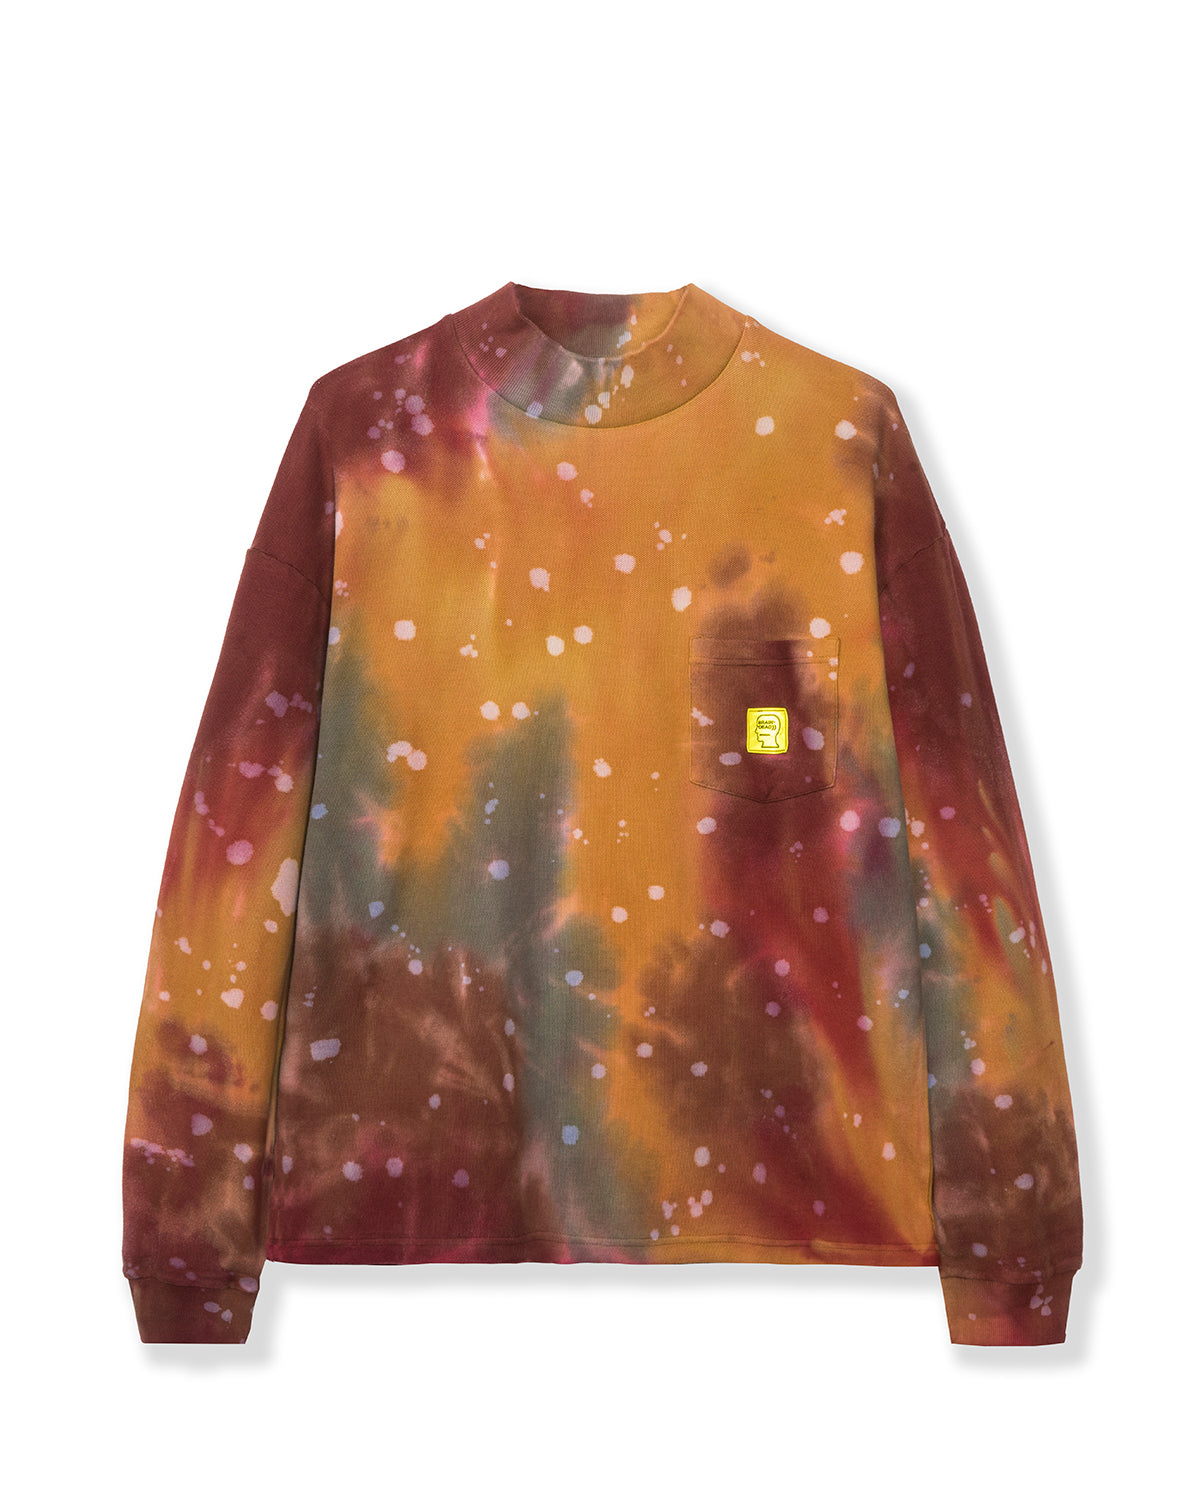 Dyed Pique Mock Neck Long Sleeve - Red/Multi 1